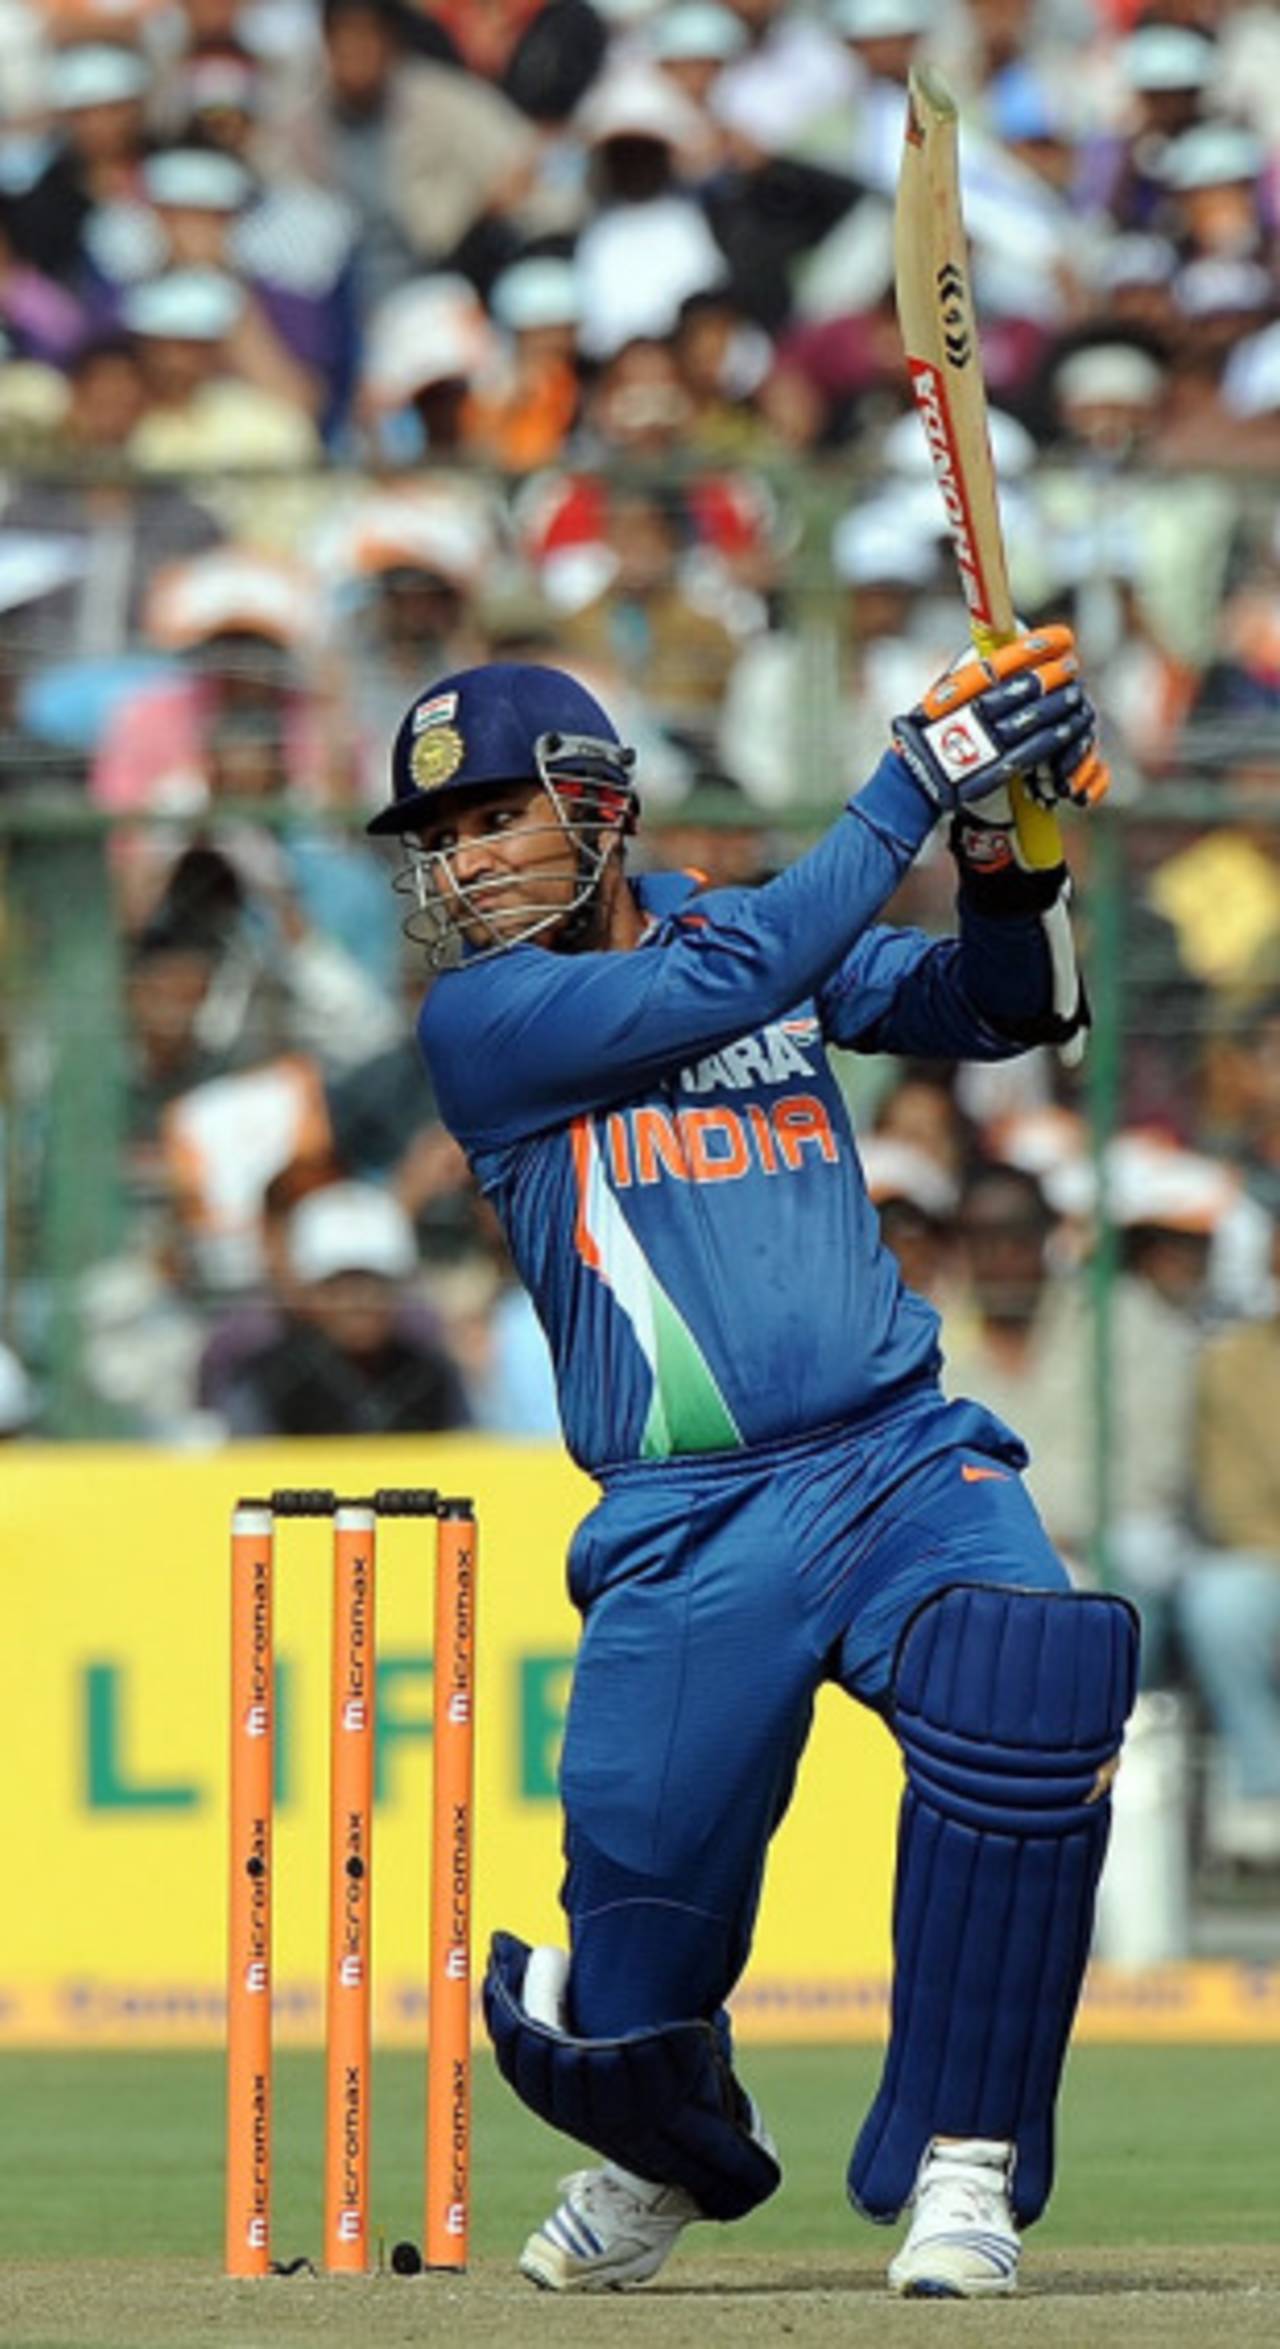 Virender Sehwag: "When I play a cover-drive, I play it to score runs. I don't play a shot to get out"&nbsp;&nbsp;&bull;&nbsp;&nbsp;AFP